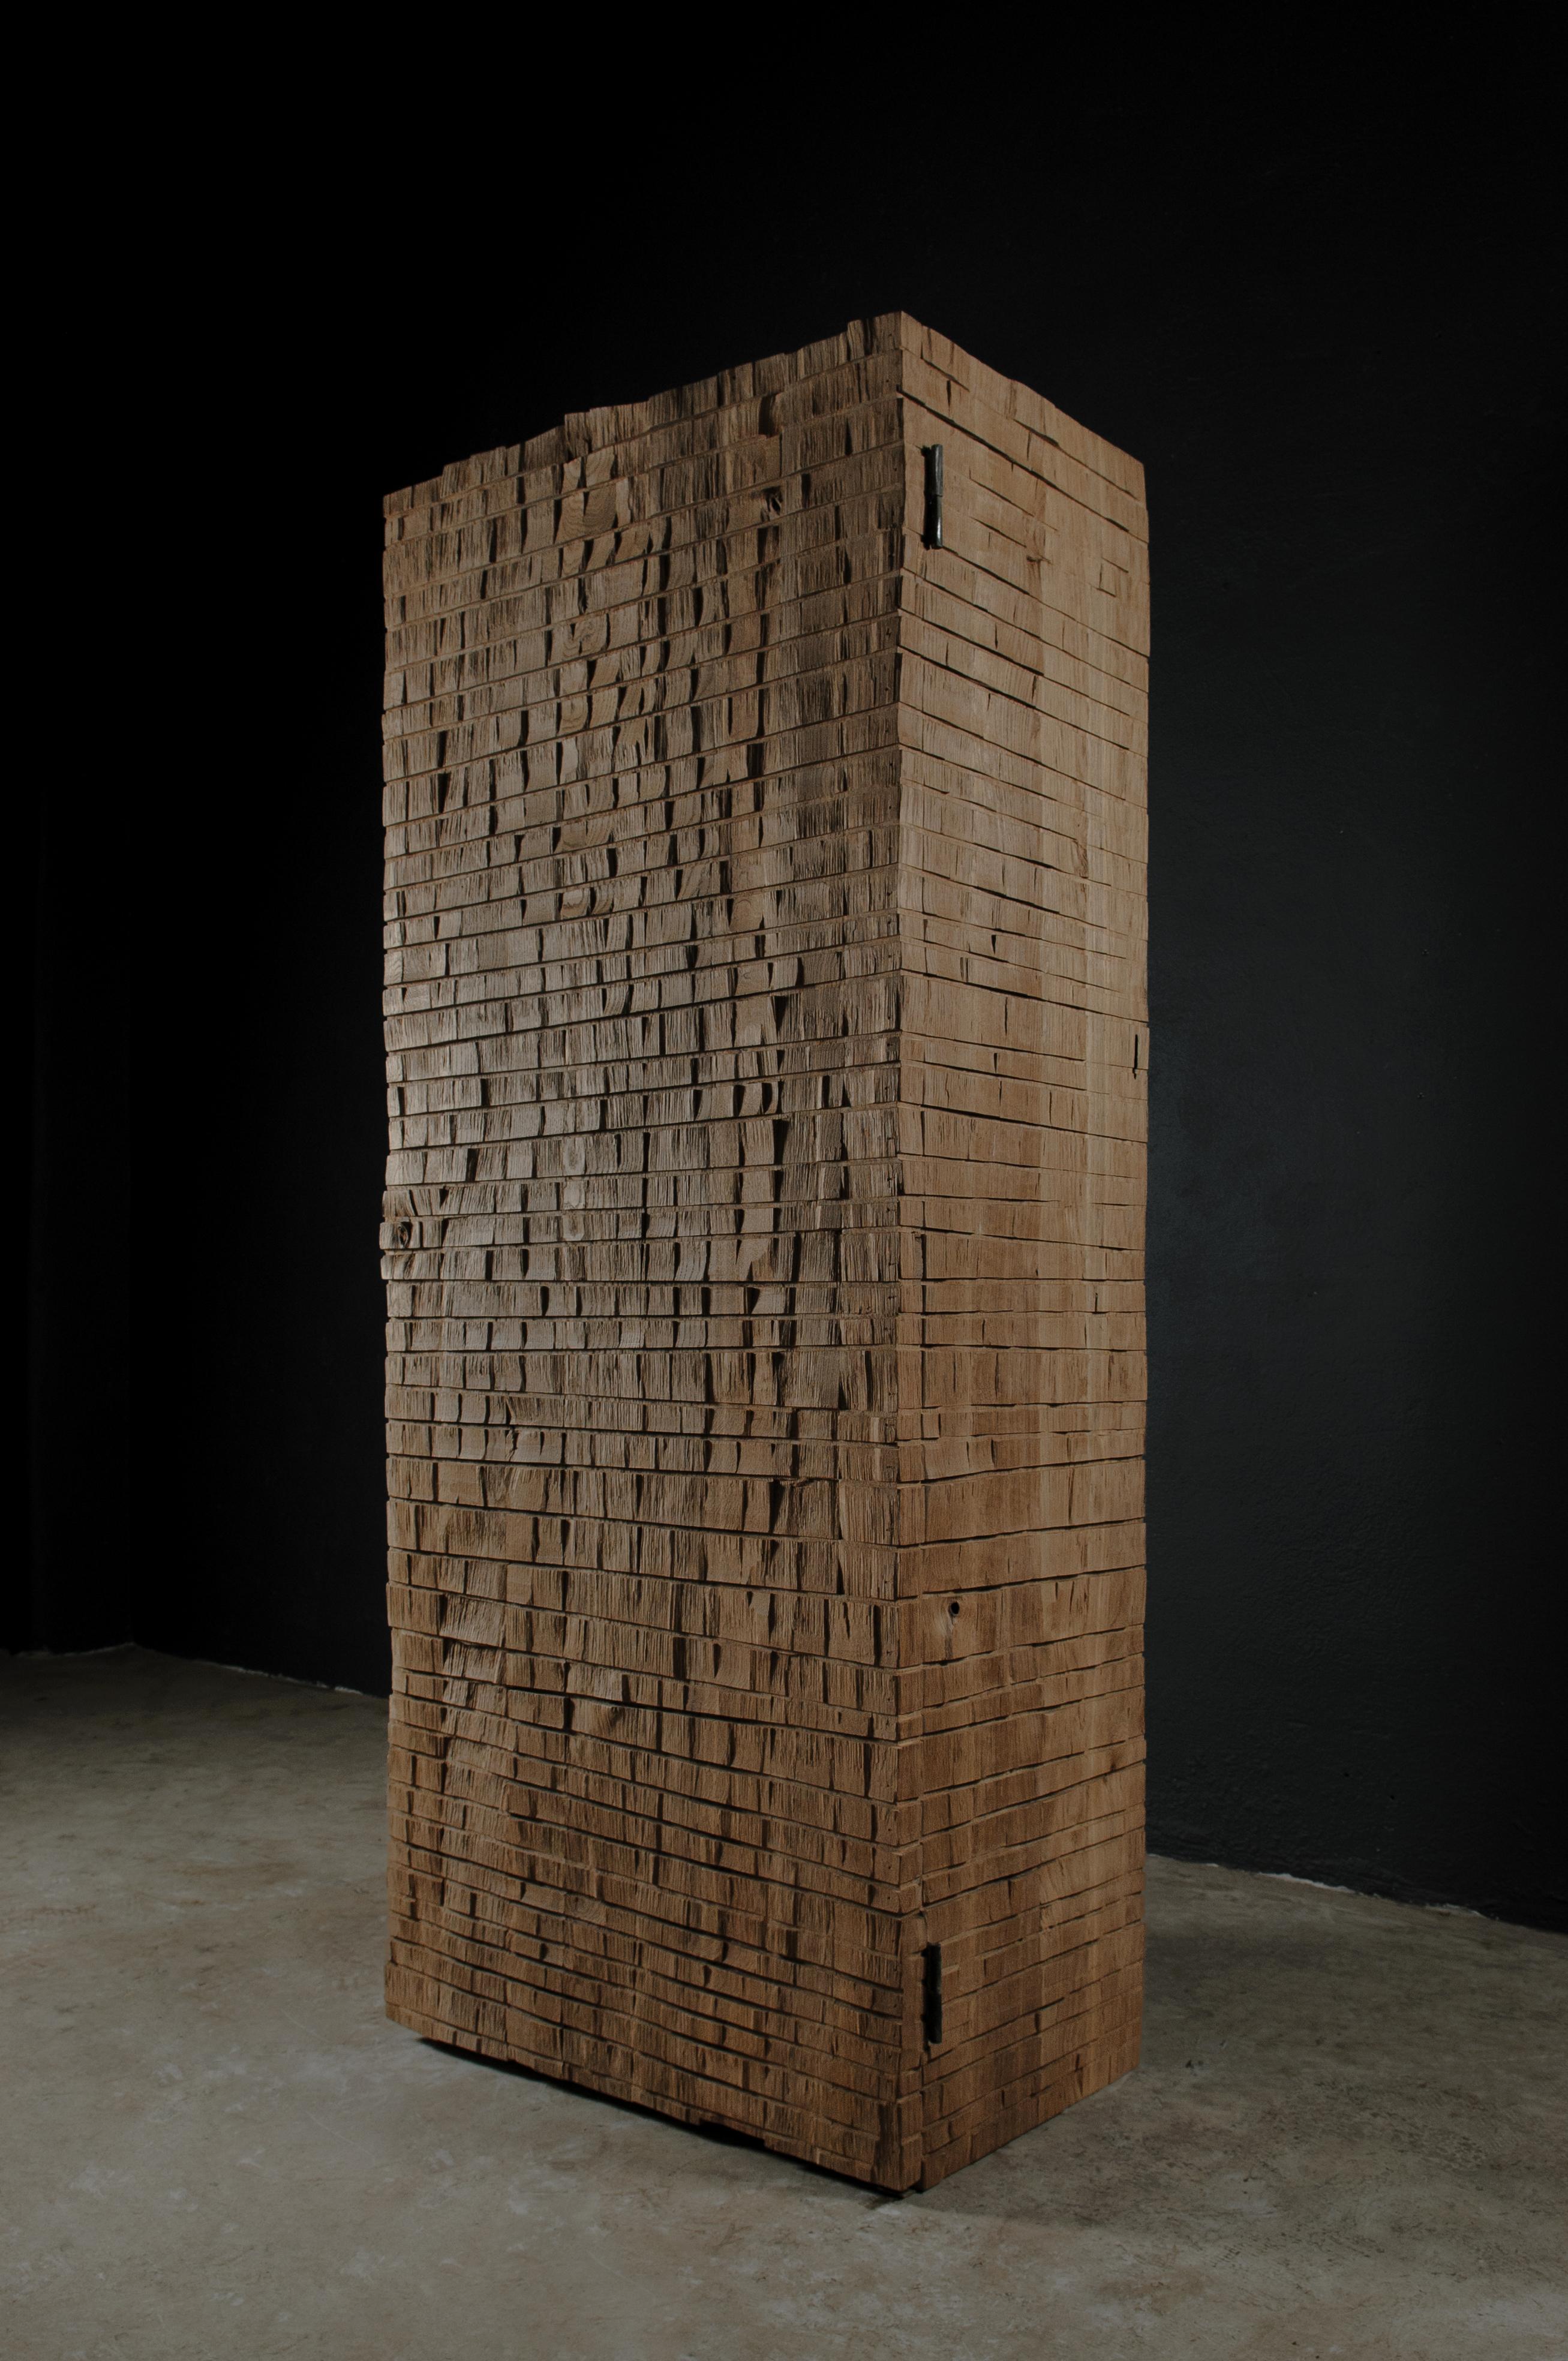 Contemporary Brutalist cabinet made of solid oak

Dimensions: 
180 x 80 x 45 cm

Unique piece made to order.

Founded by artist Denis Milovanov, SÓHA design studio conceives and produces furniture design and decorative objects in solid oak in an